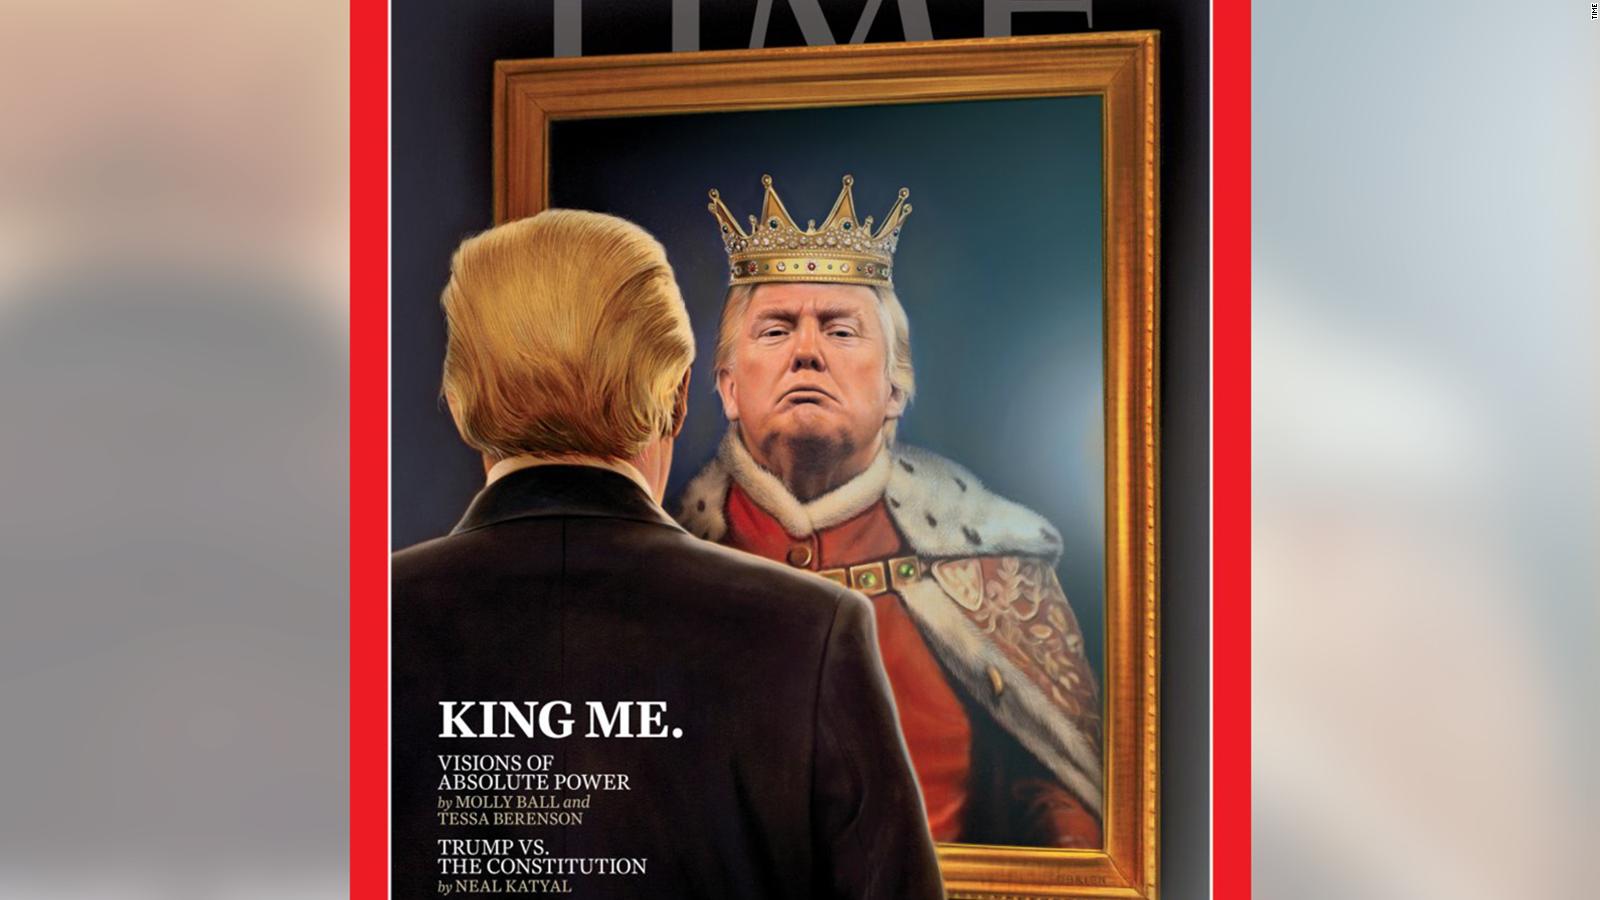 TIME cover depicts Trump dressed as a king - CNN Video